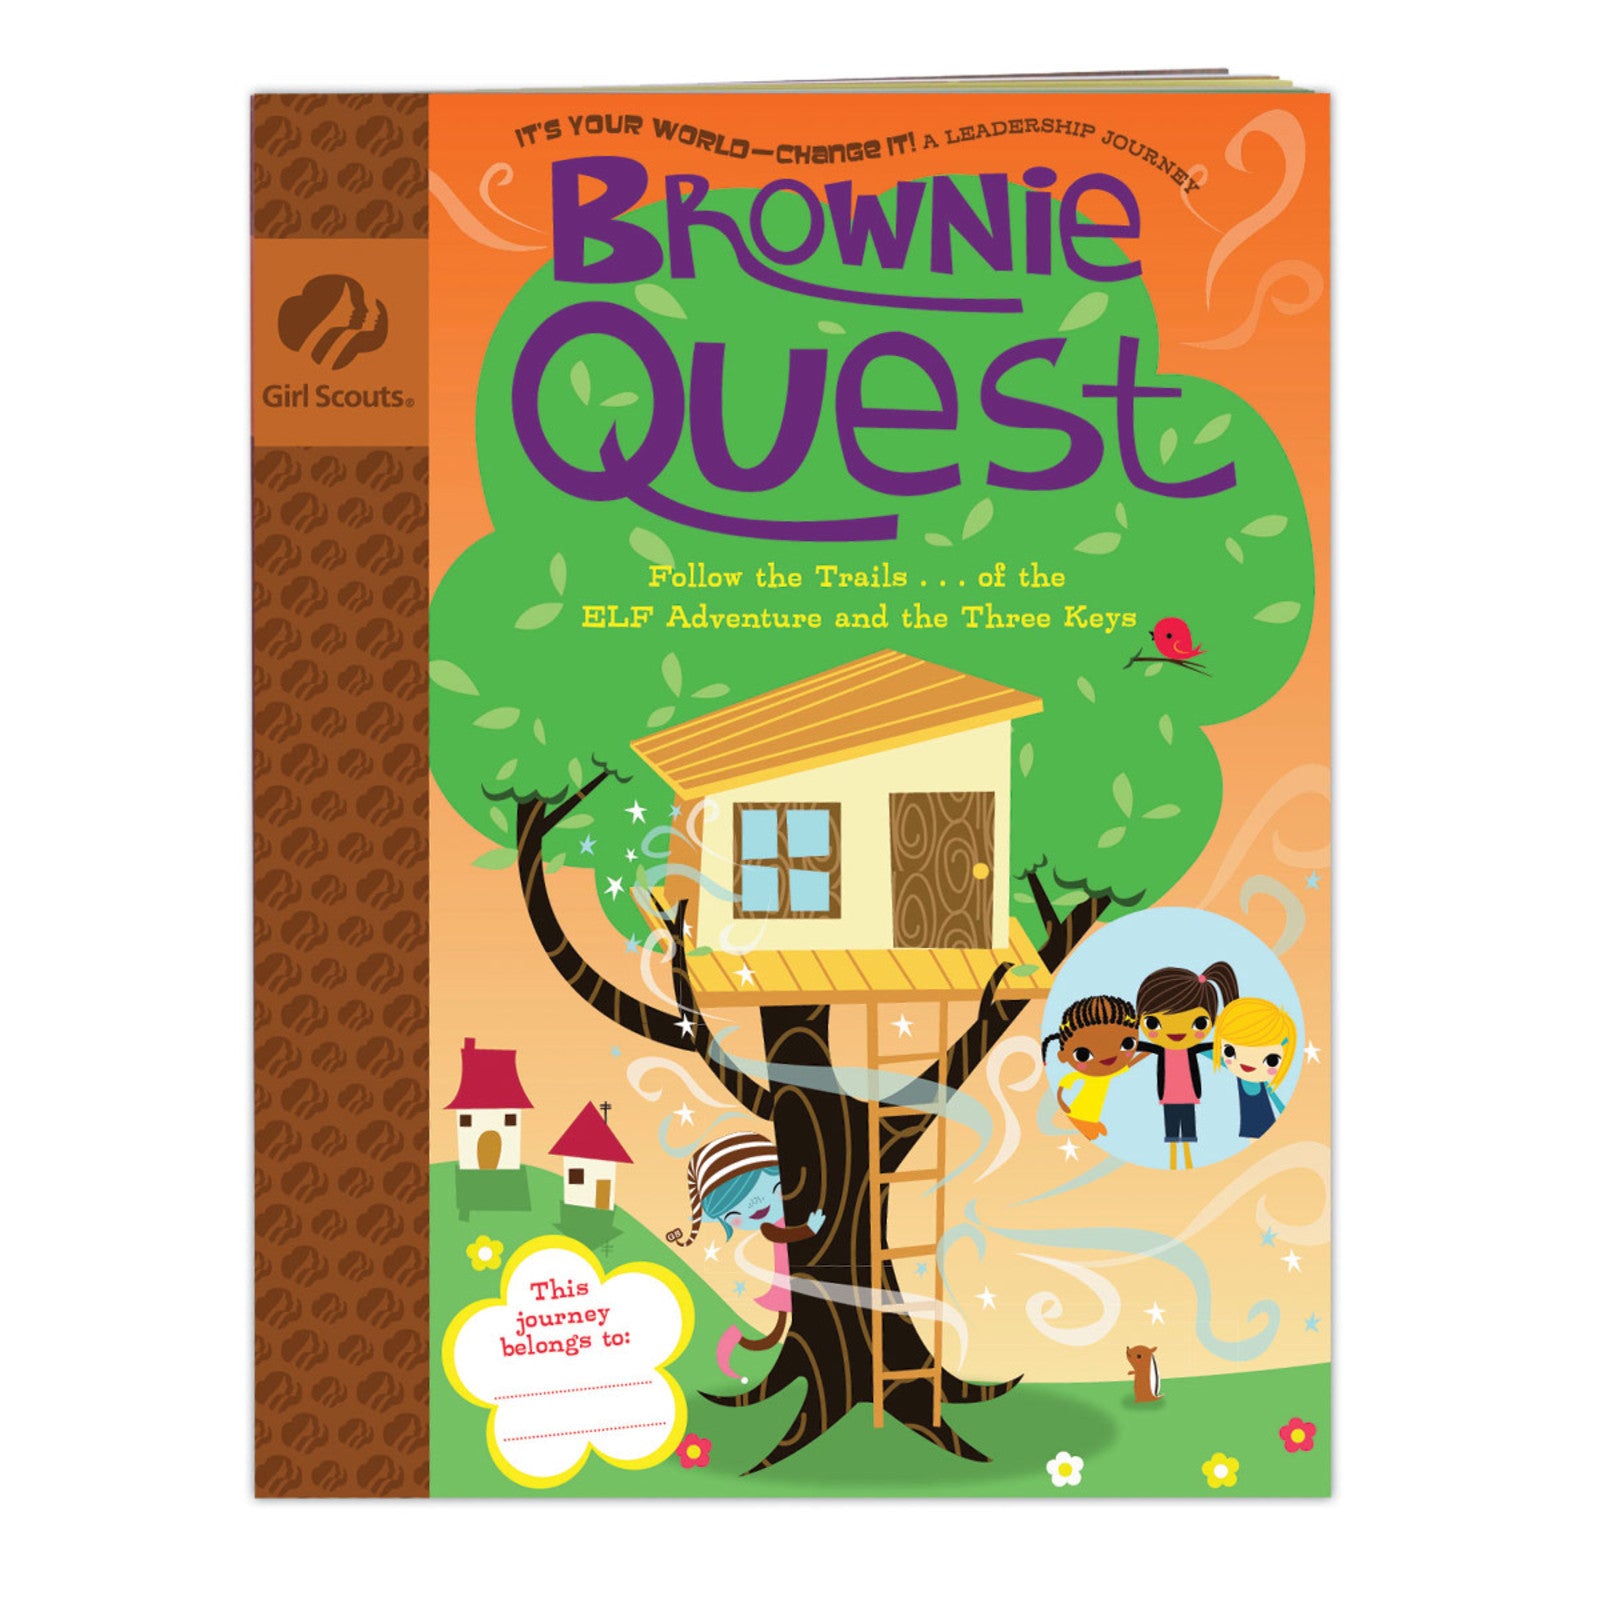 Girl Scouts Brownie Quest Journey Book - Basics Clothing Store